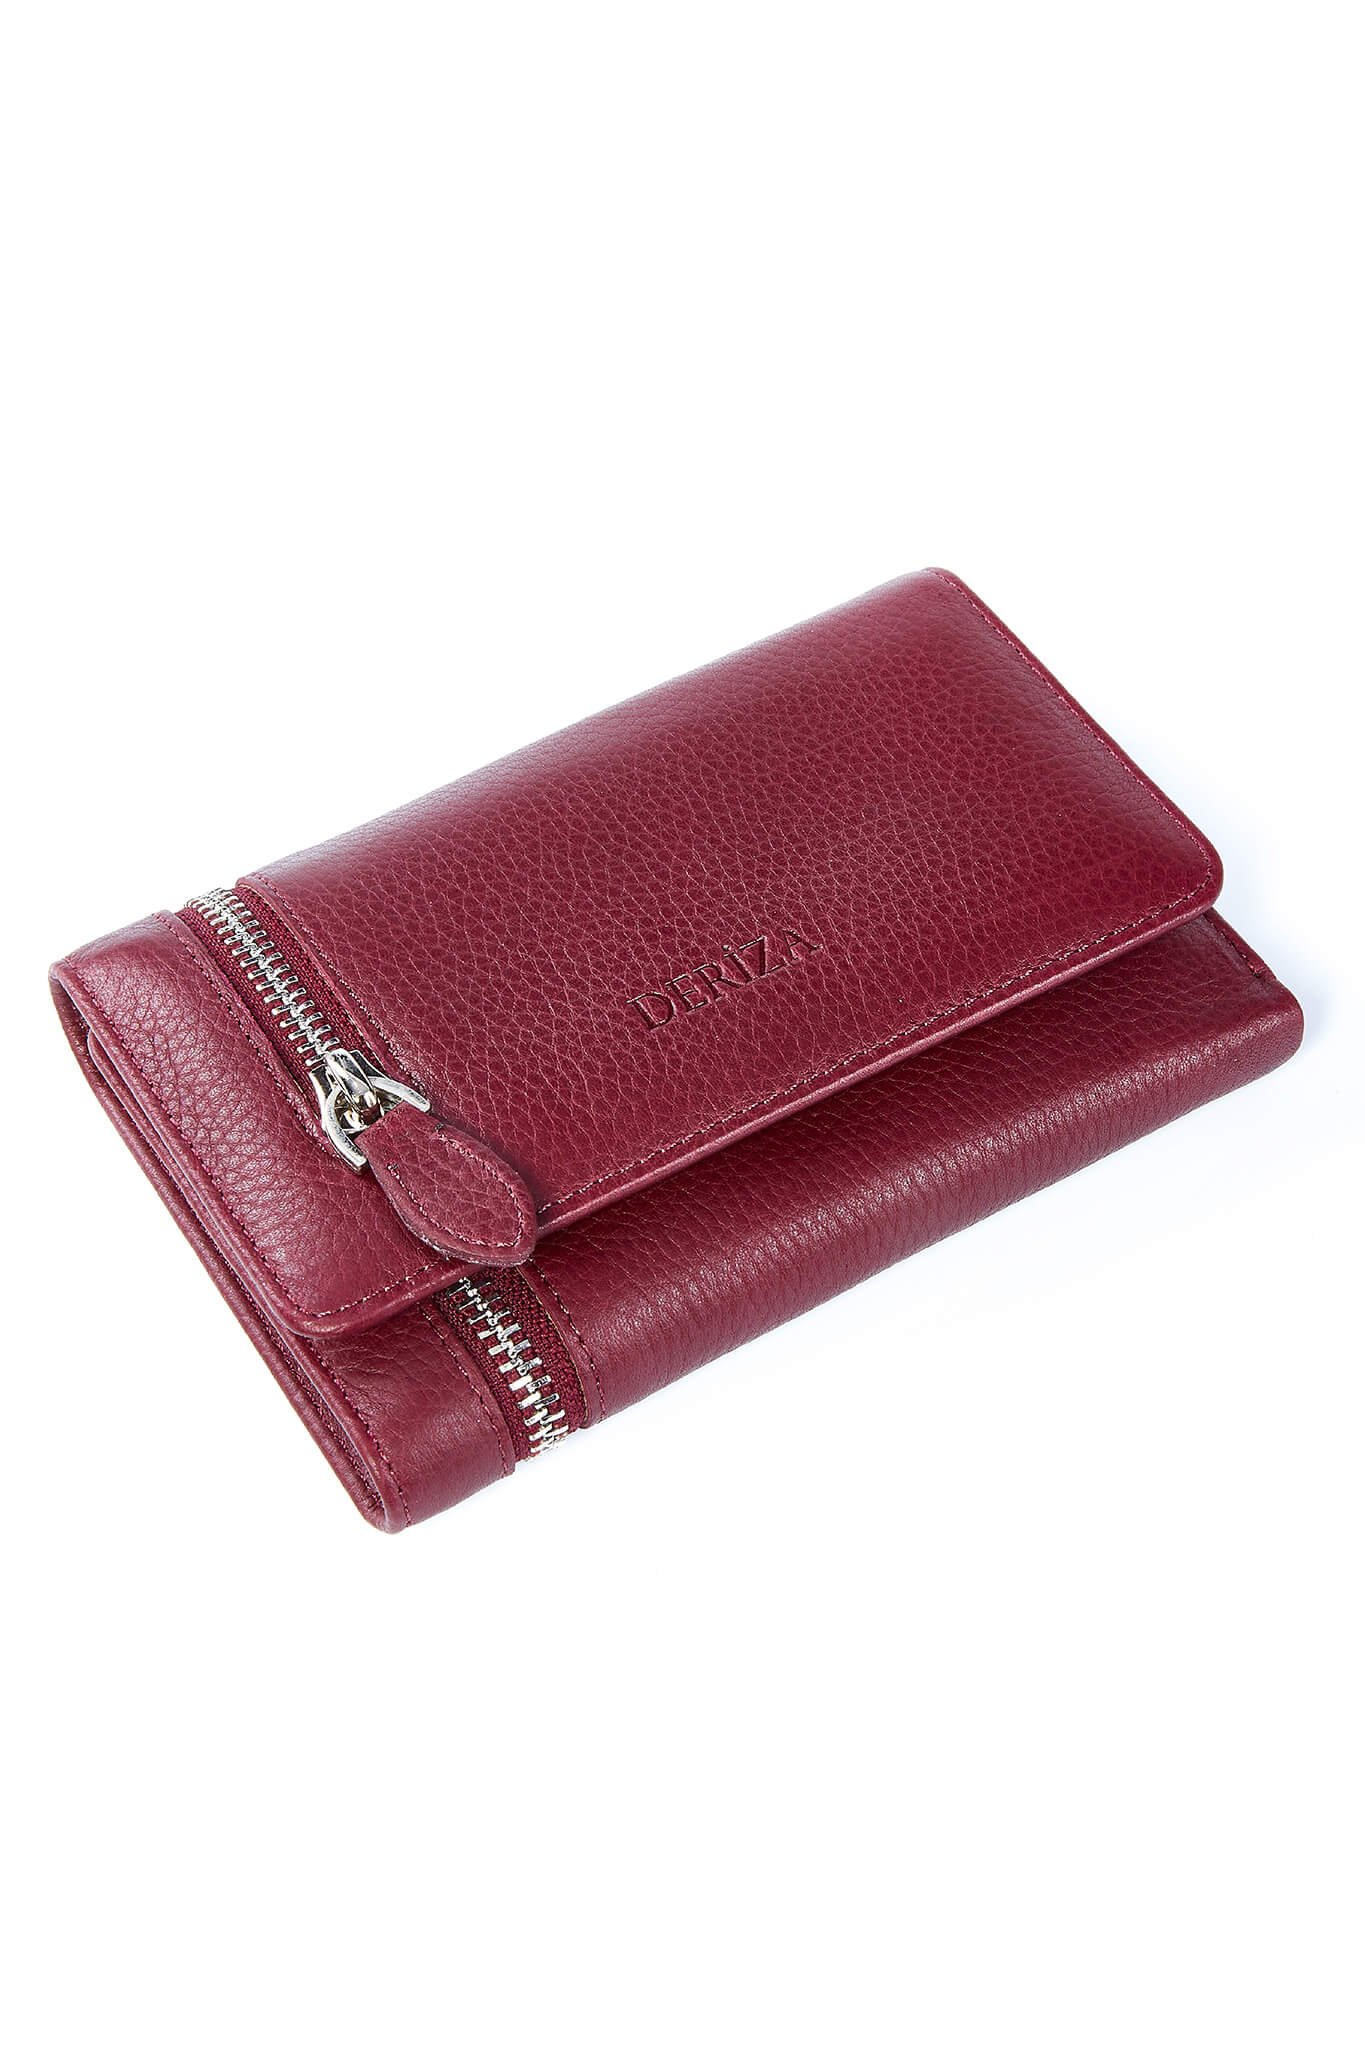 Zippered Genuine Leather Women's Wallet Claret Red